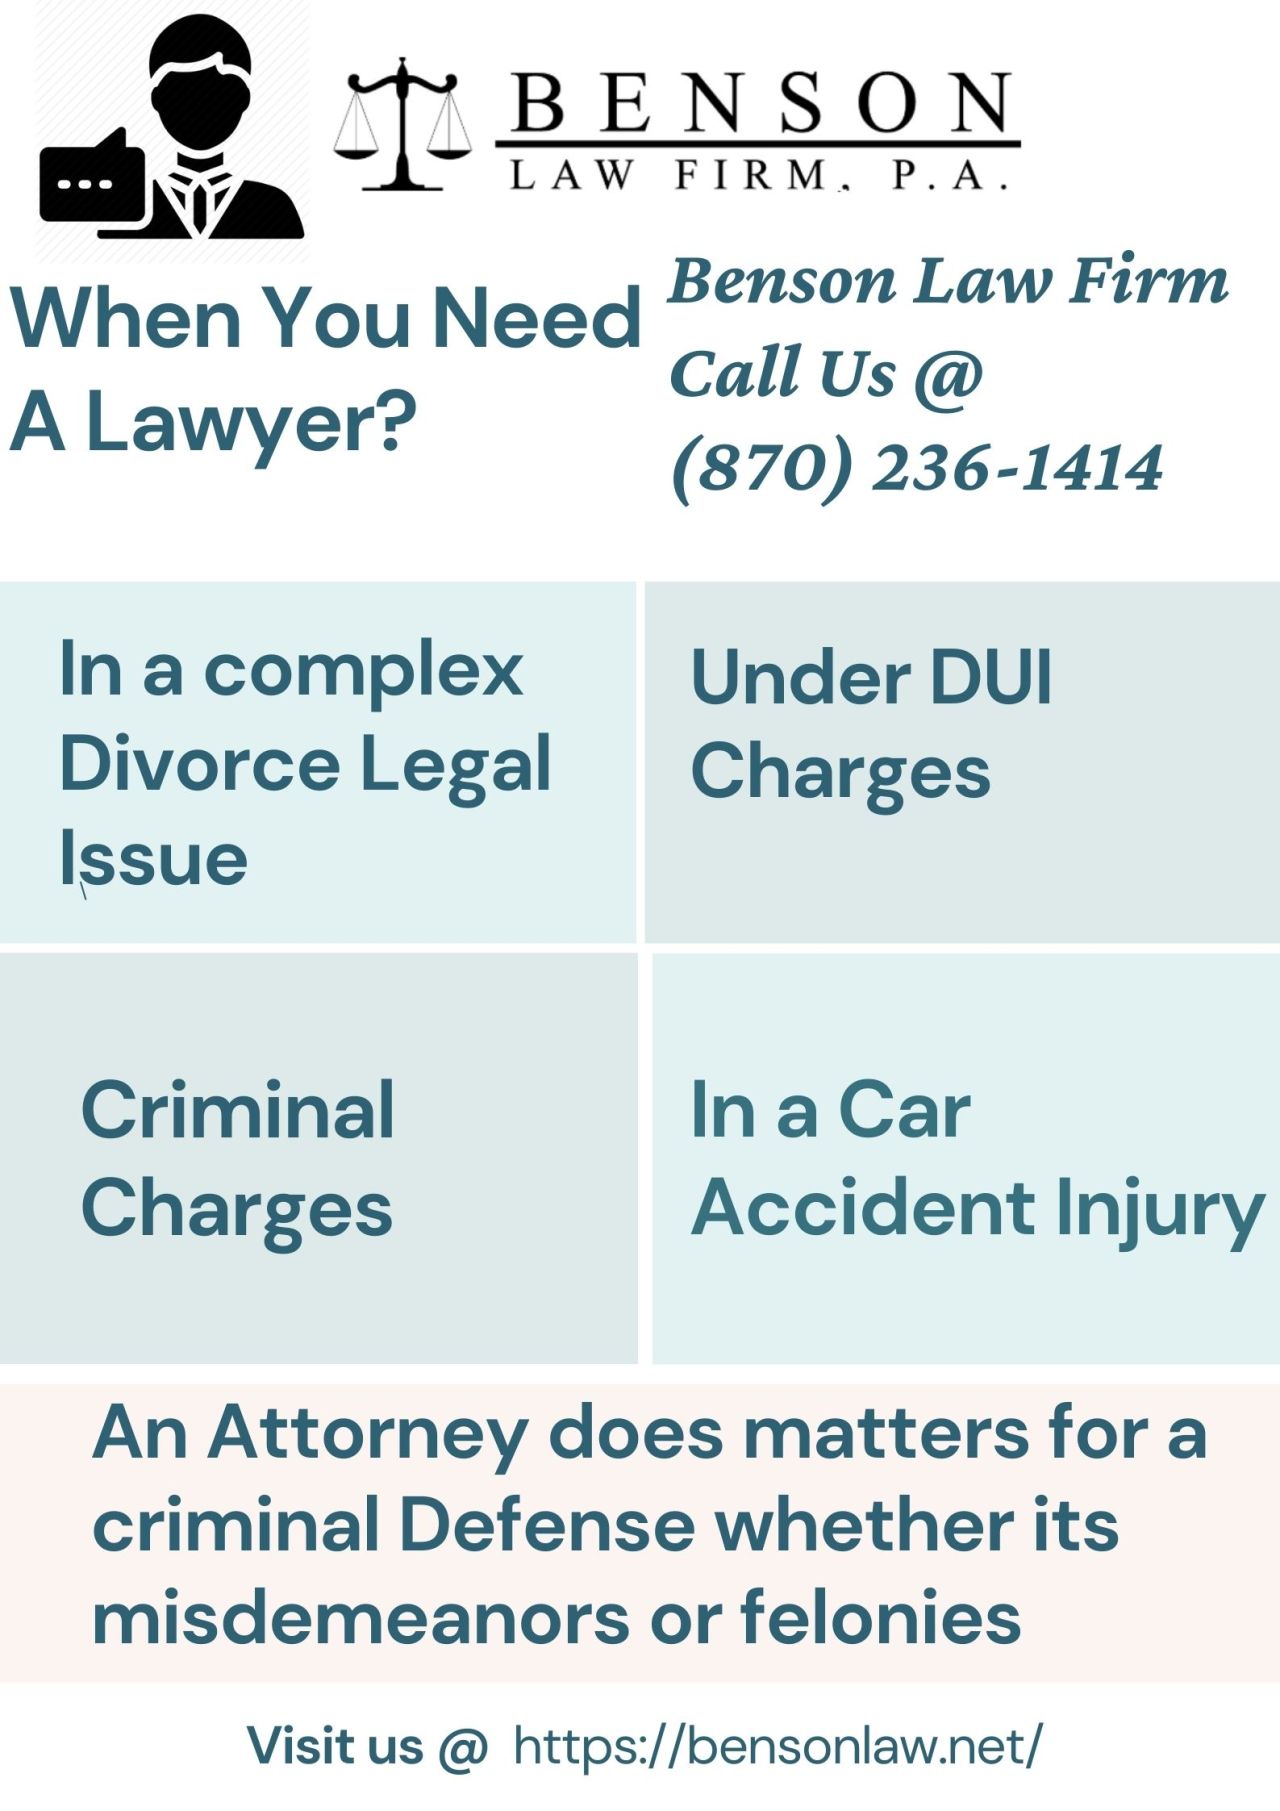 When You Need A Lawyer?